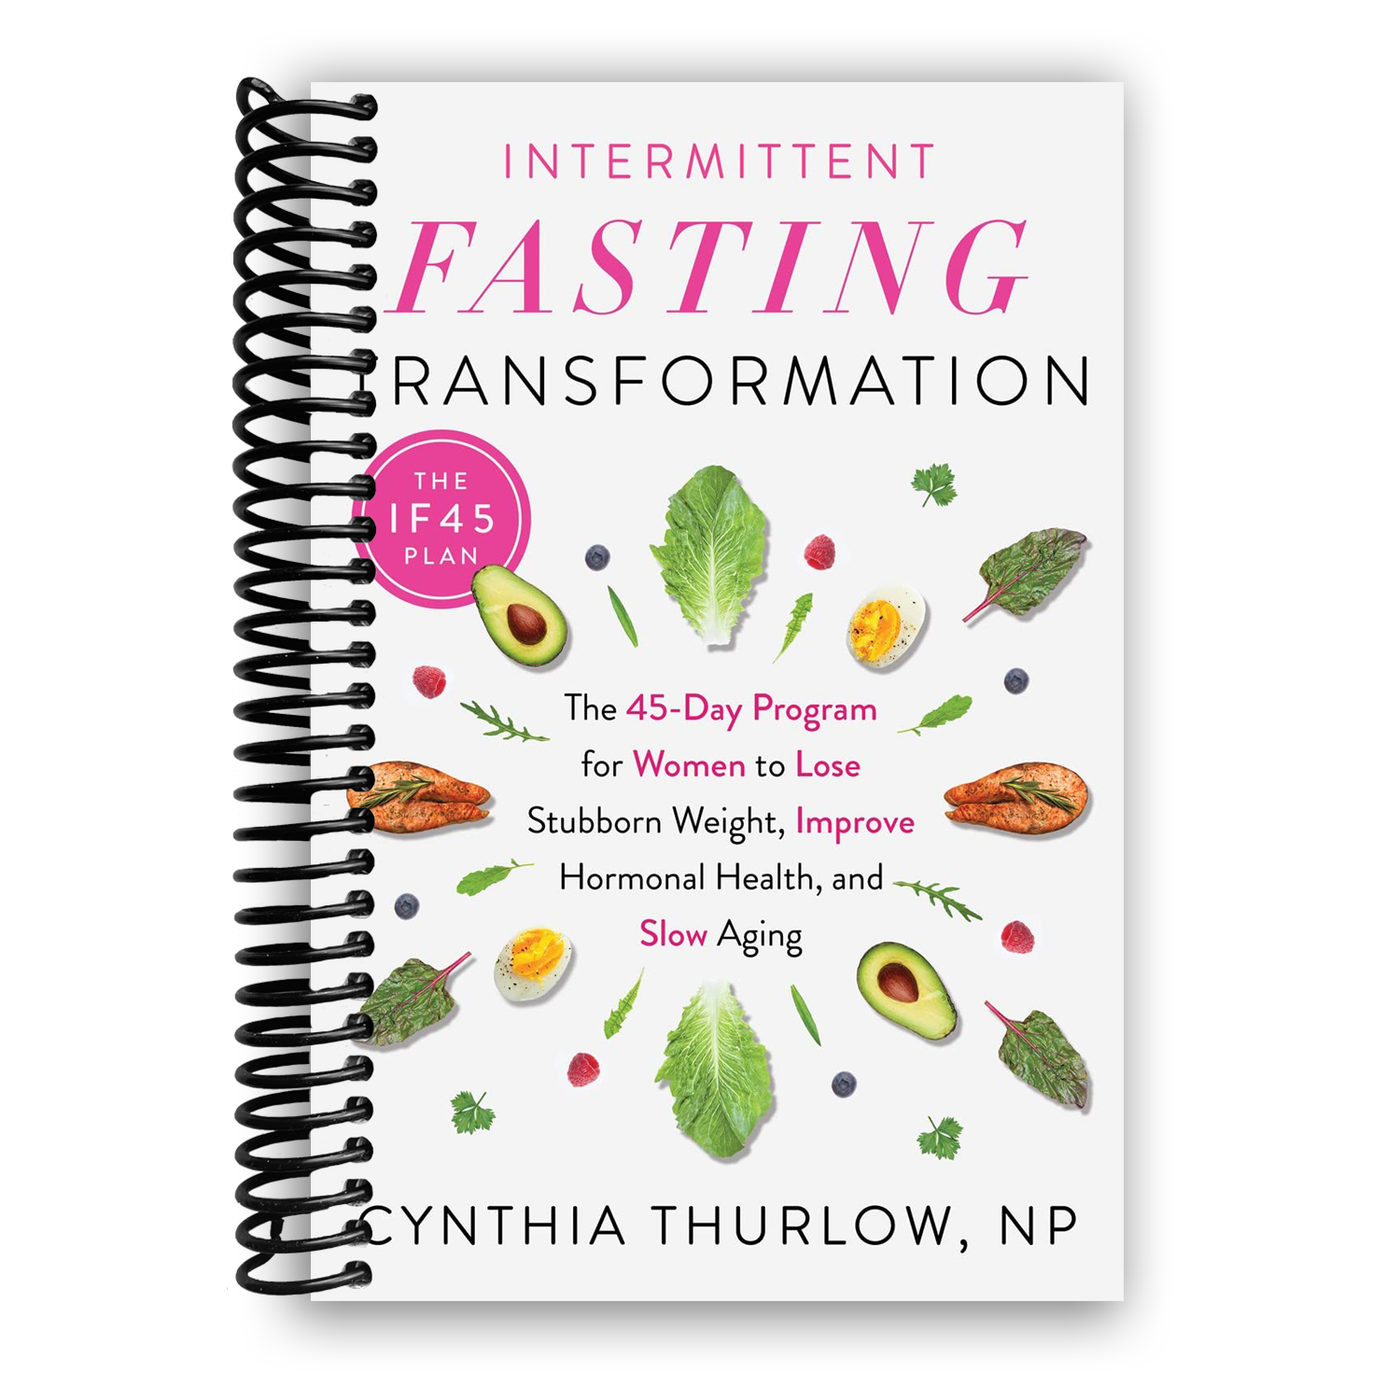 Intermittent Fasting Transformation: The 45-Day Program for Women to Lose Stubborn Weight, Improve Hormonal Health, and Slow Aging (Spiral Bound)